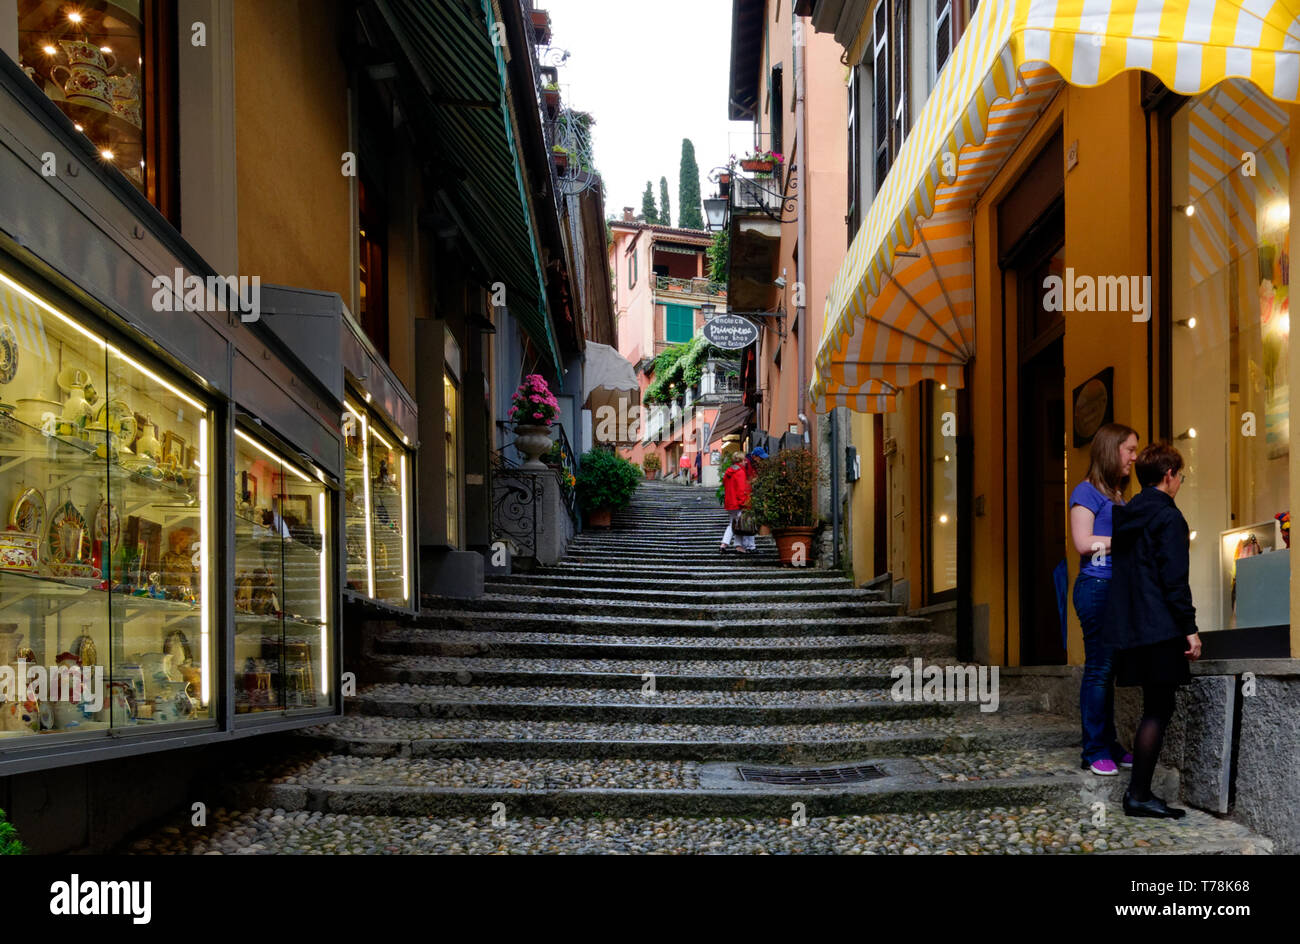 Tourists on cobbled stairs admiring the wares in high end shops in an alley in Bellagio, Italy Stock Photo